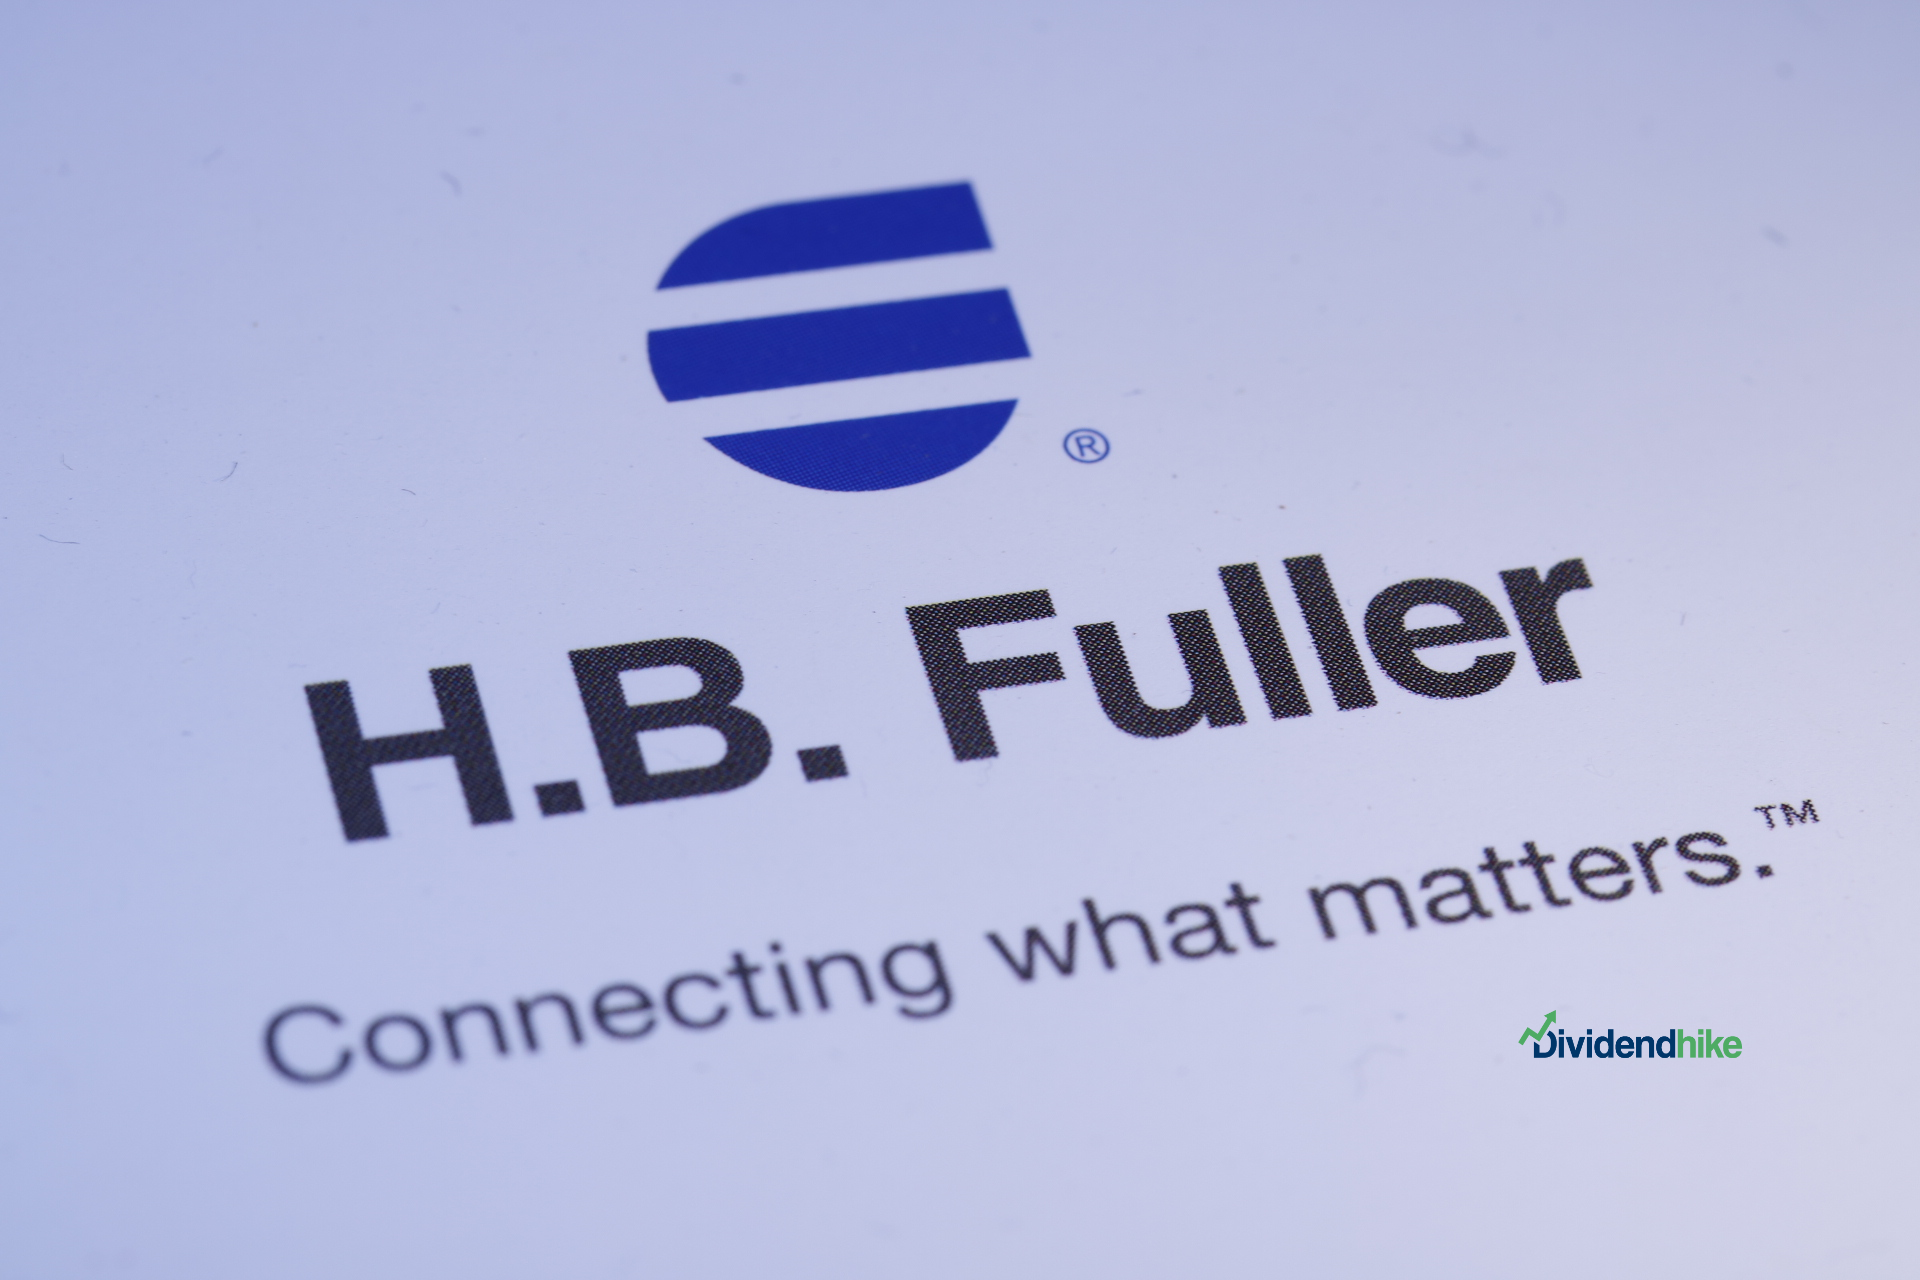 H.B. Fuller hikes dividend by 7.7%